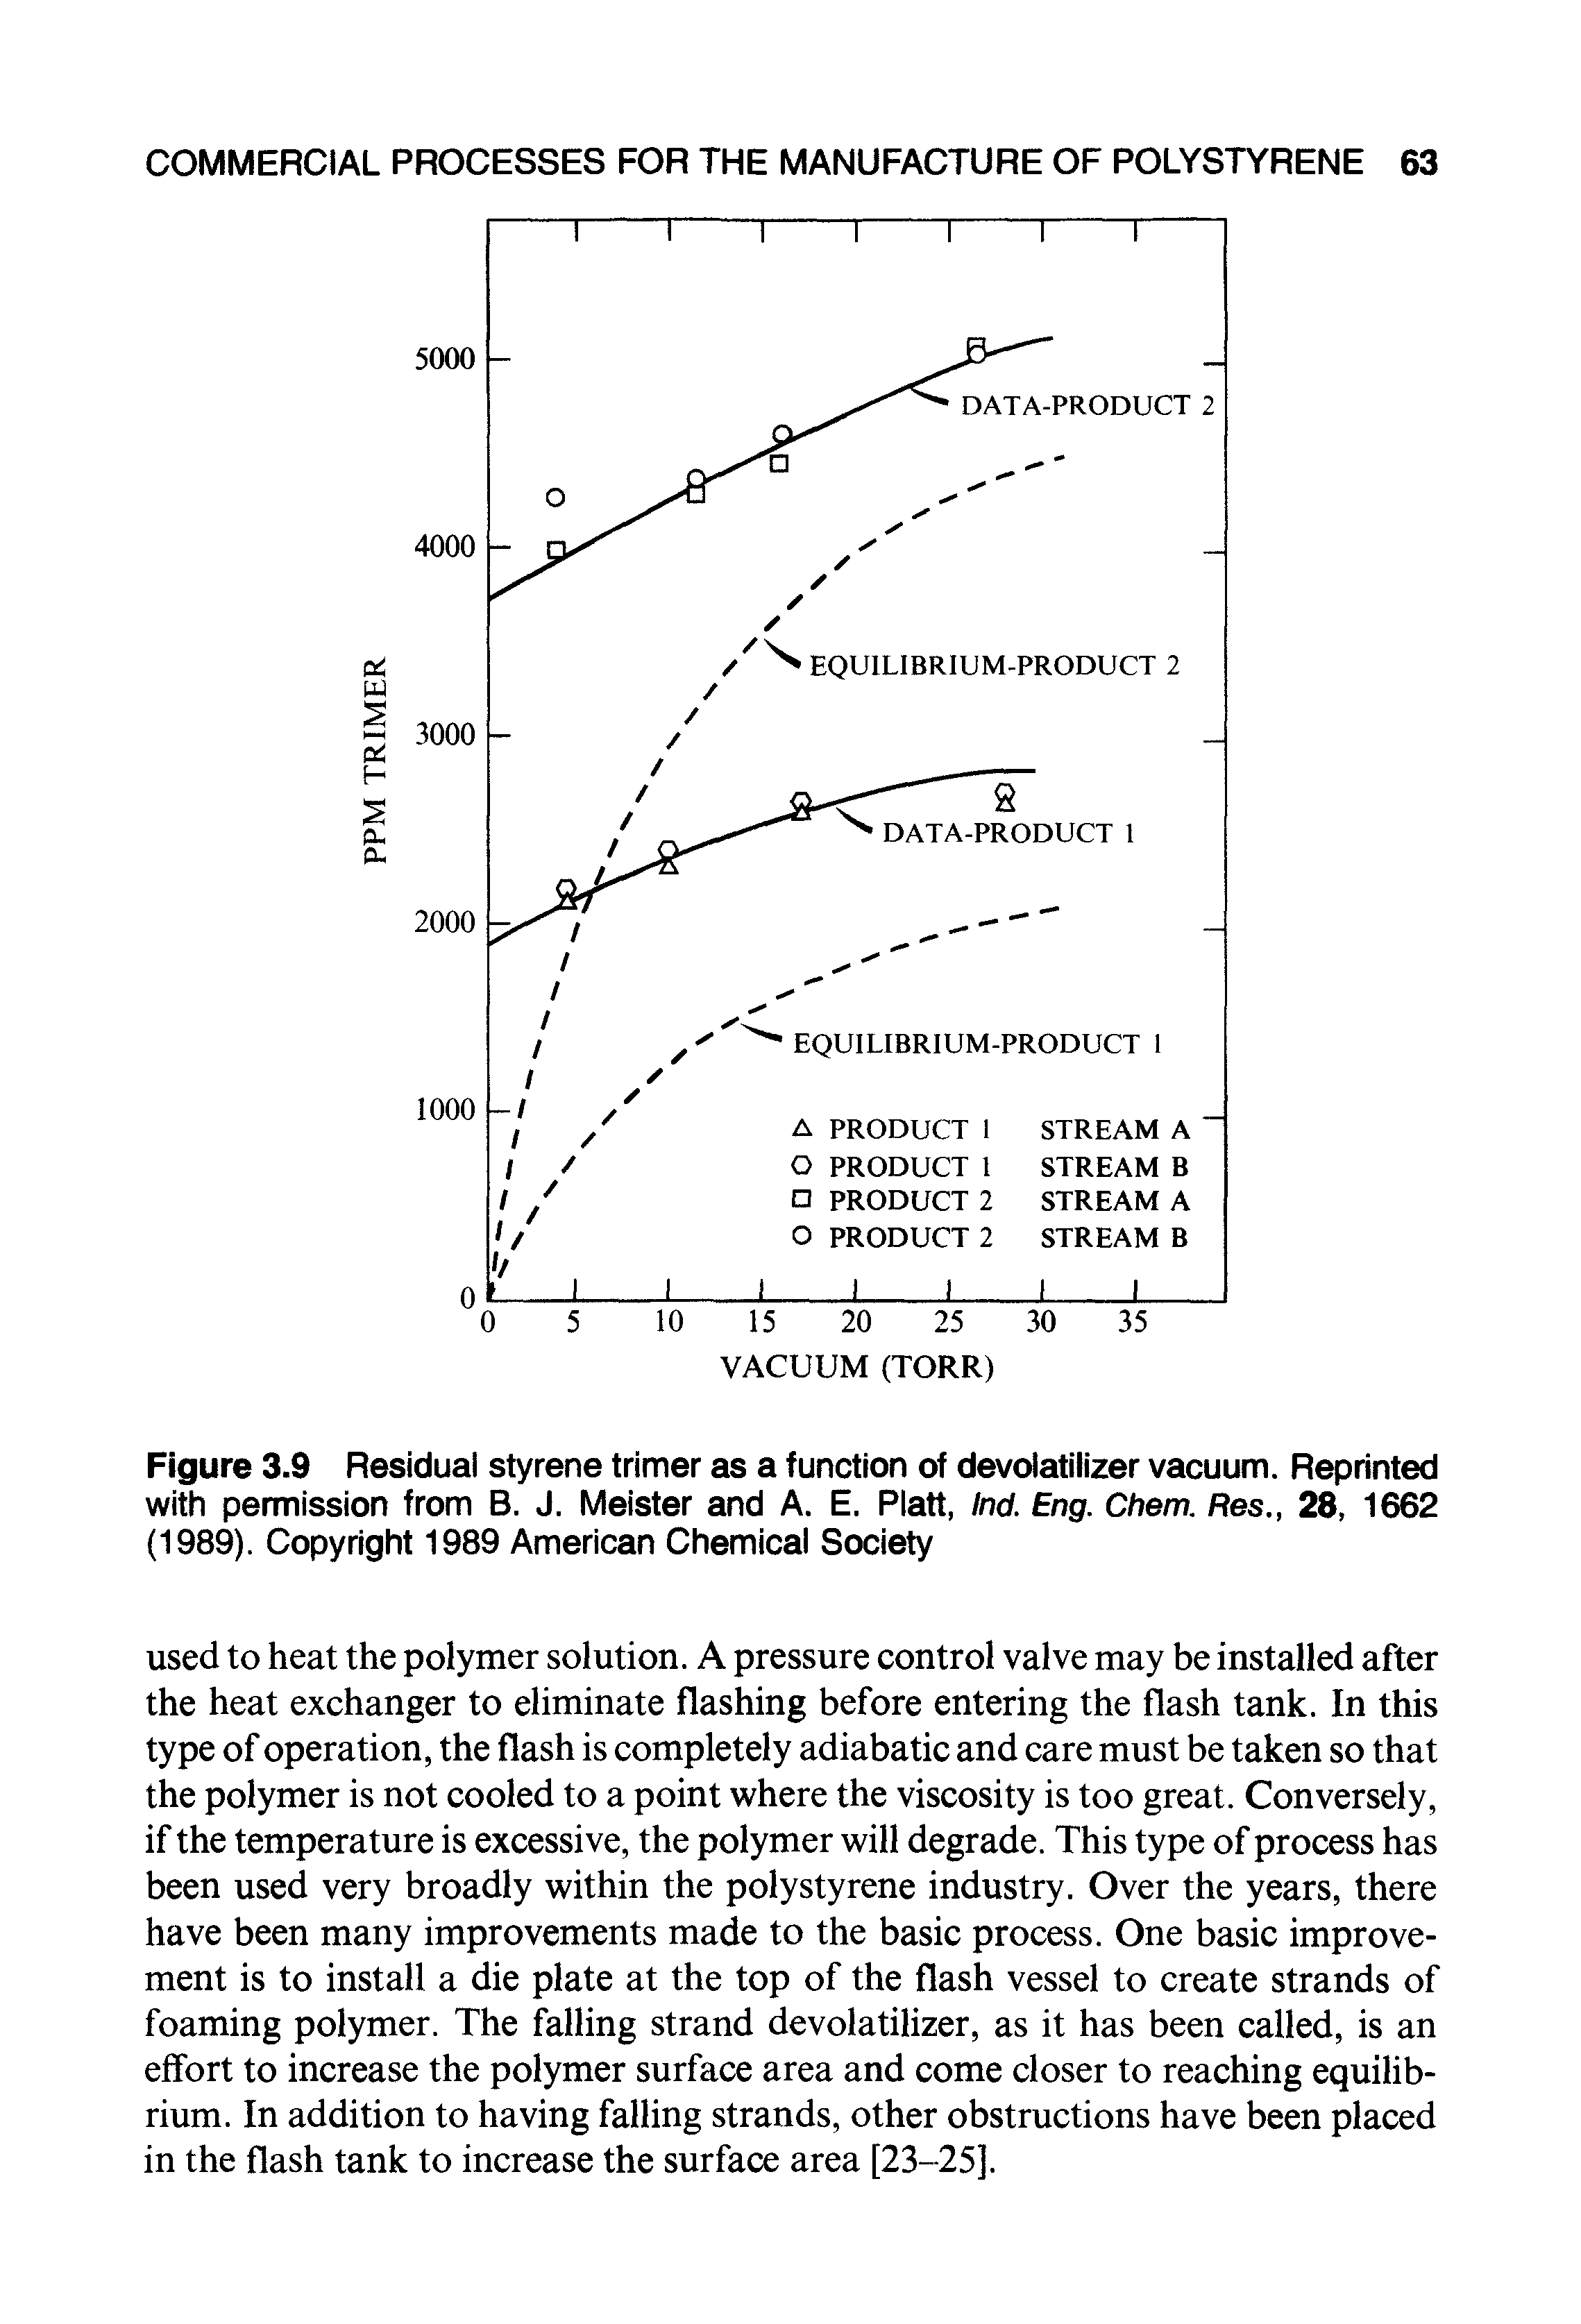 Figure 3.9 Residual styrene trimer as a function of devolatilizer vacuum. Reprinted with permission from B. J. Meister and A. E. Platt, Ind. Eng. Chem. Res., 28, 1662 (1989). Copyright 1989 American Chemical Society...